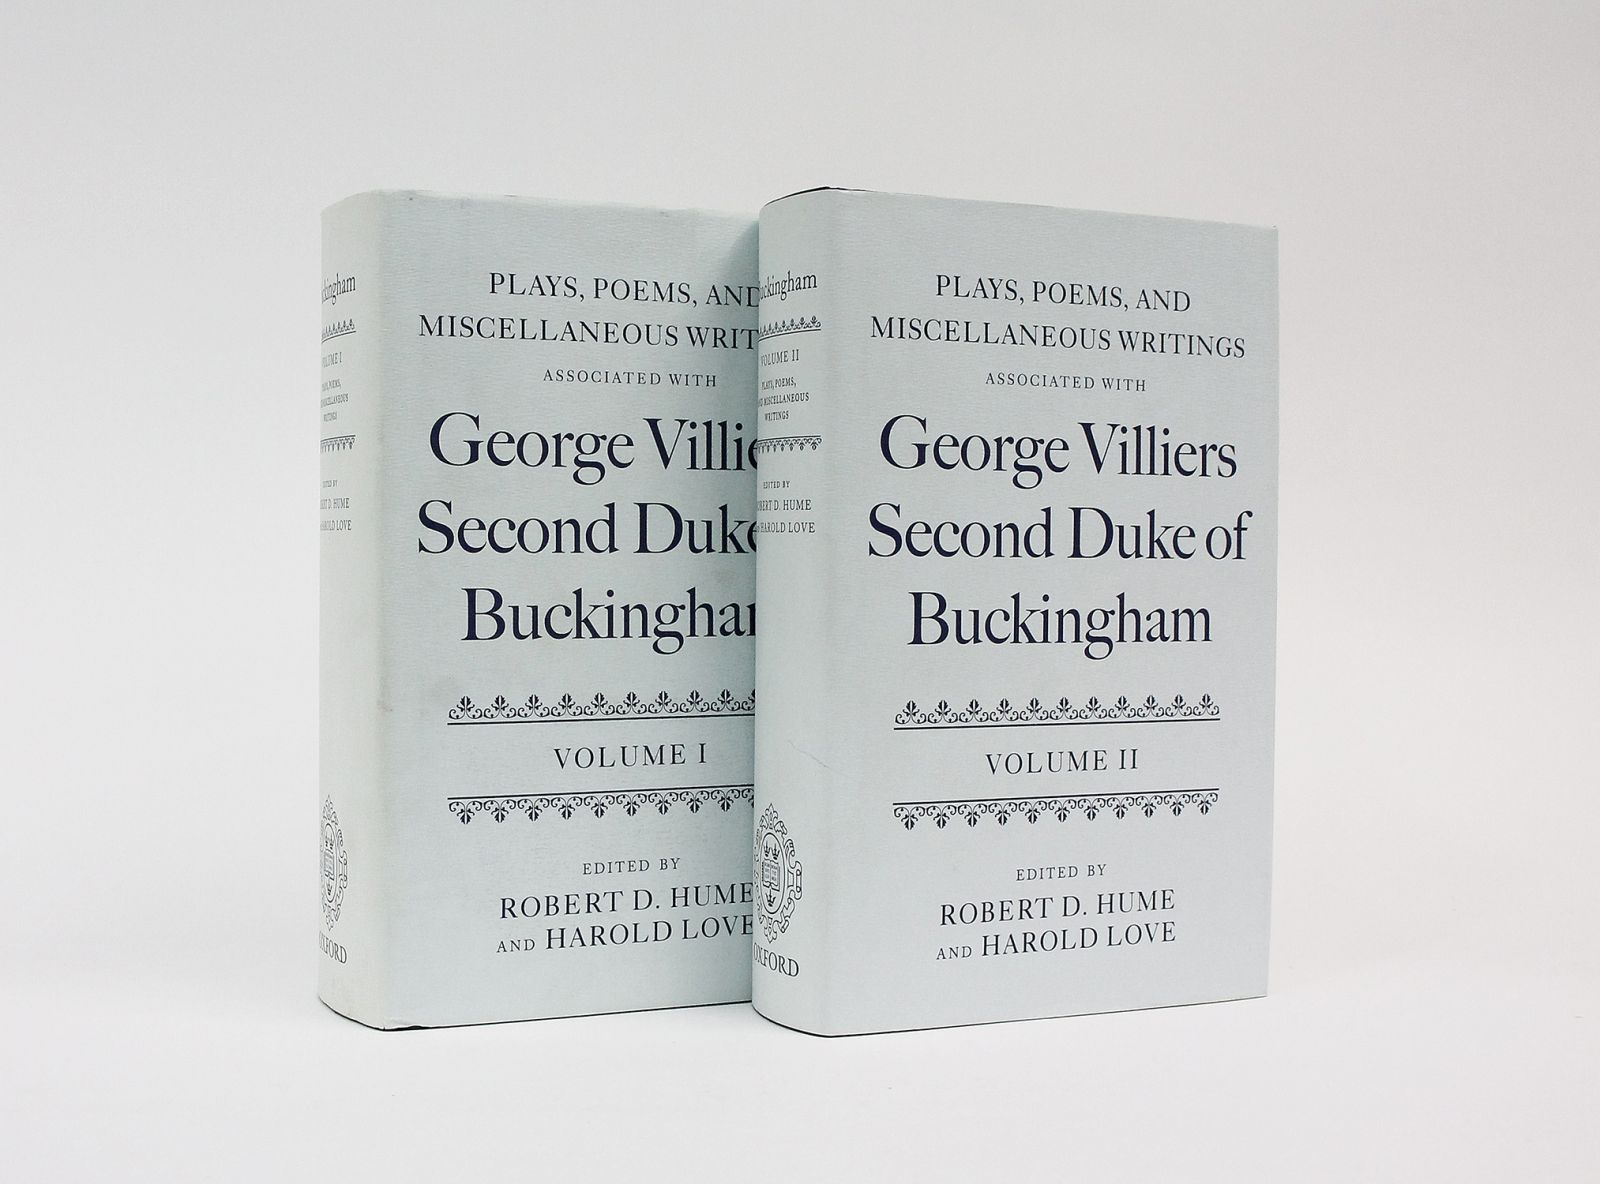 PLAYS, POEMS, AND MISCELLANEOUS WRITINGS ASSOCIATED WITH GEORGE VILLIERS, SECOND DUKE OF BUCKINGHAM: -  image 2